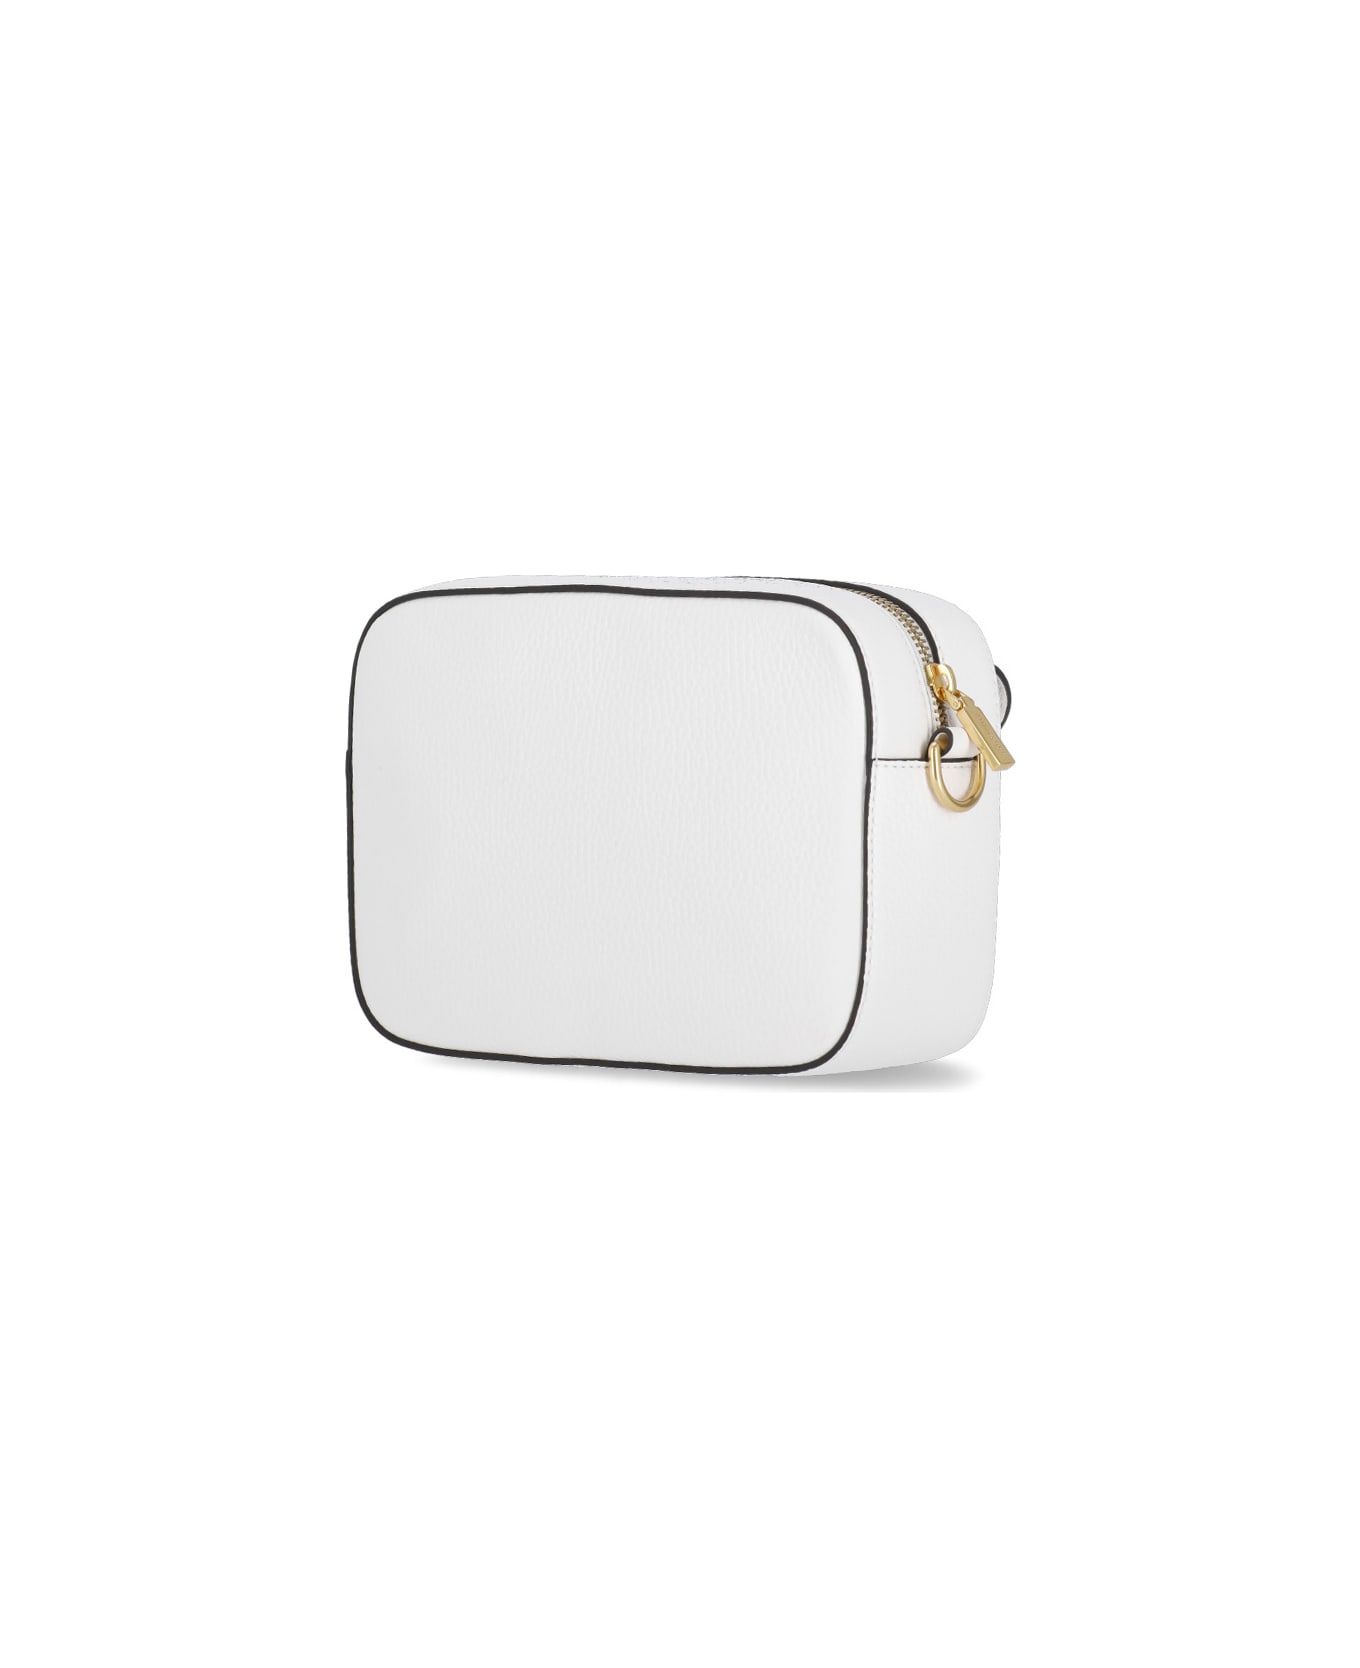 Coccinelle Beat Soft Small Shoulder Bag - White